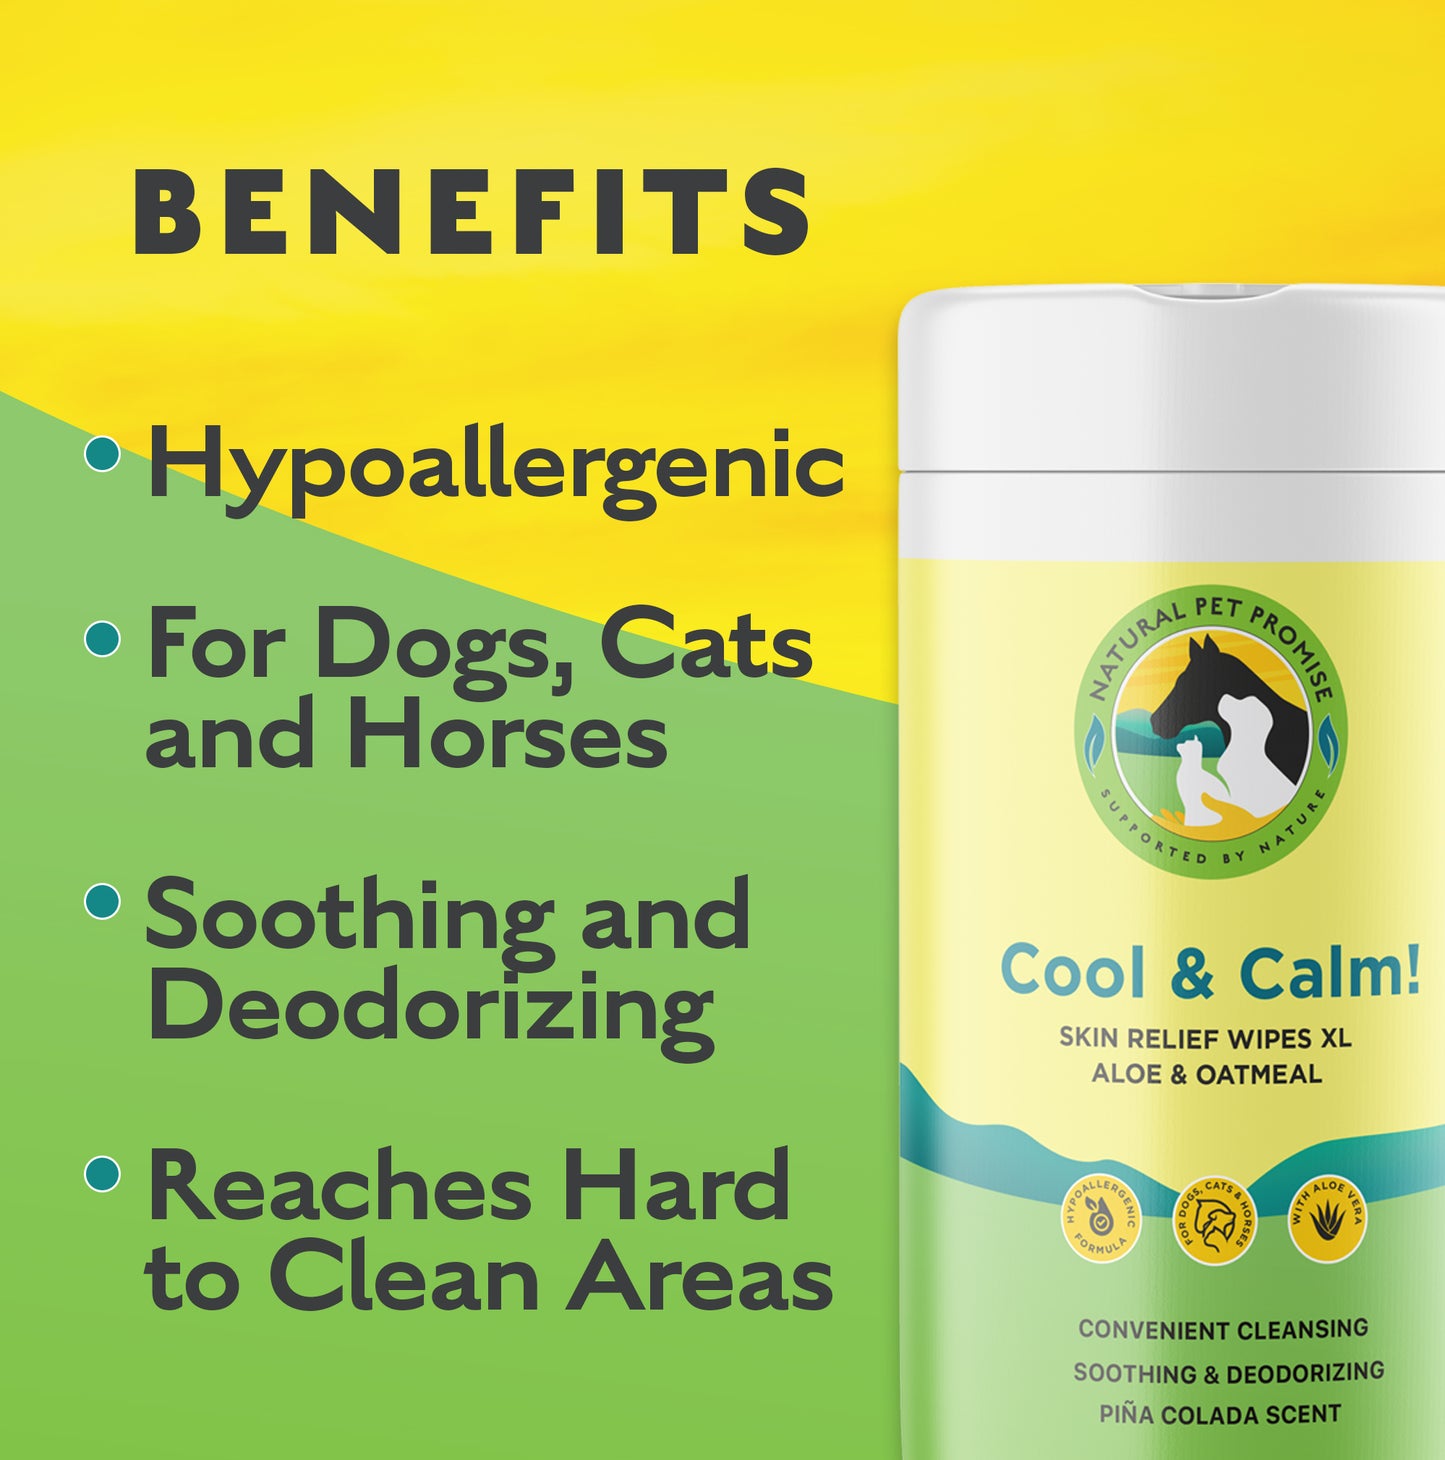 GROOMING/WIPE- Cool & Calm! Skin Relief Wipes XL